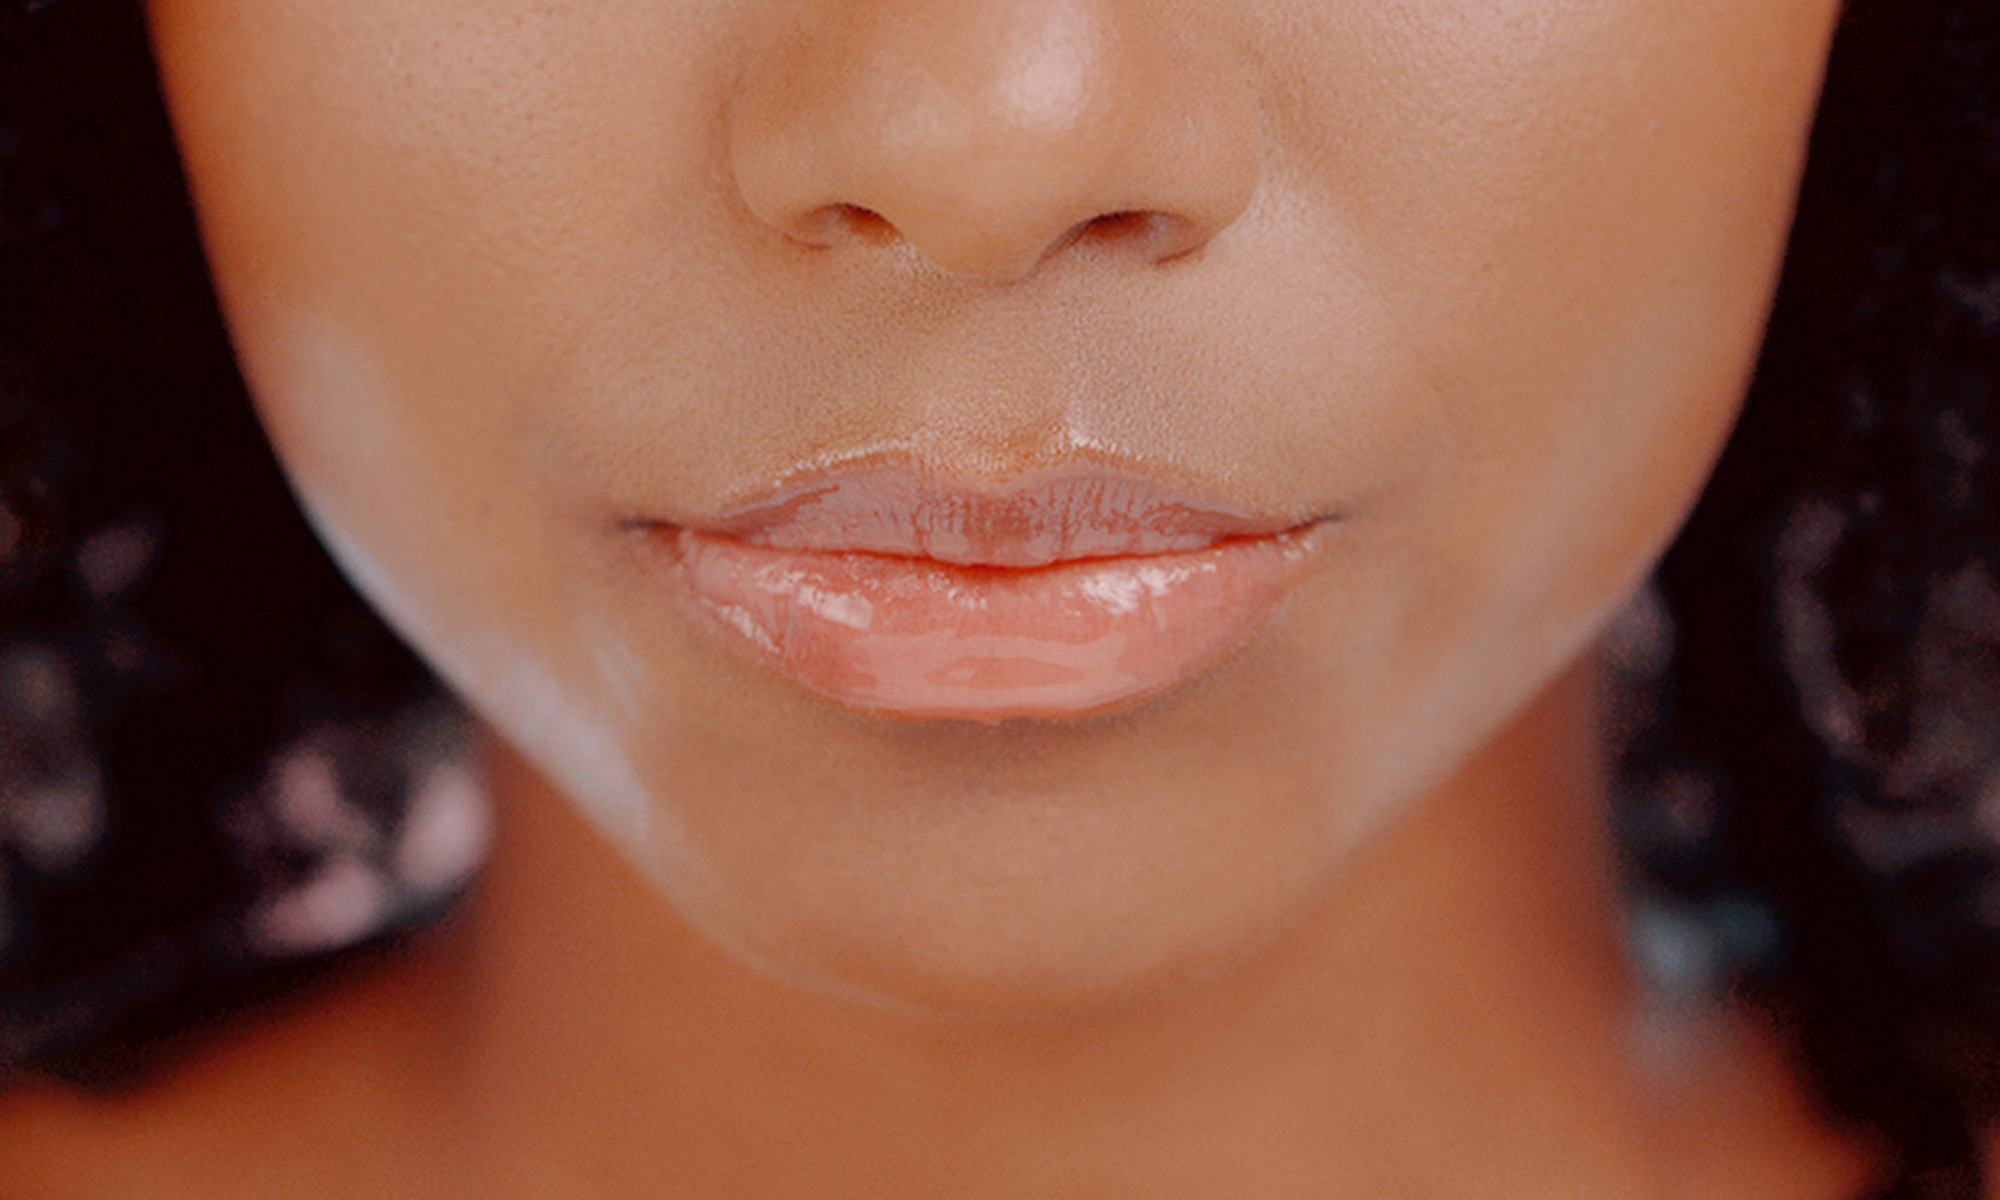 Lip Balm vs. Lip Gloss: What's the Difference?